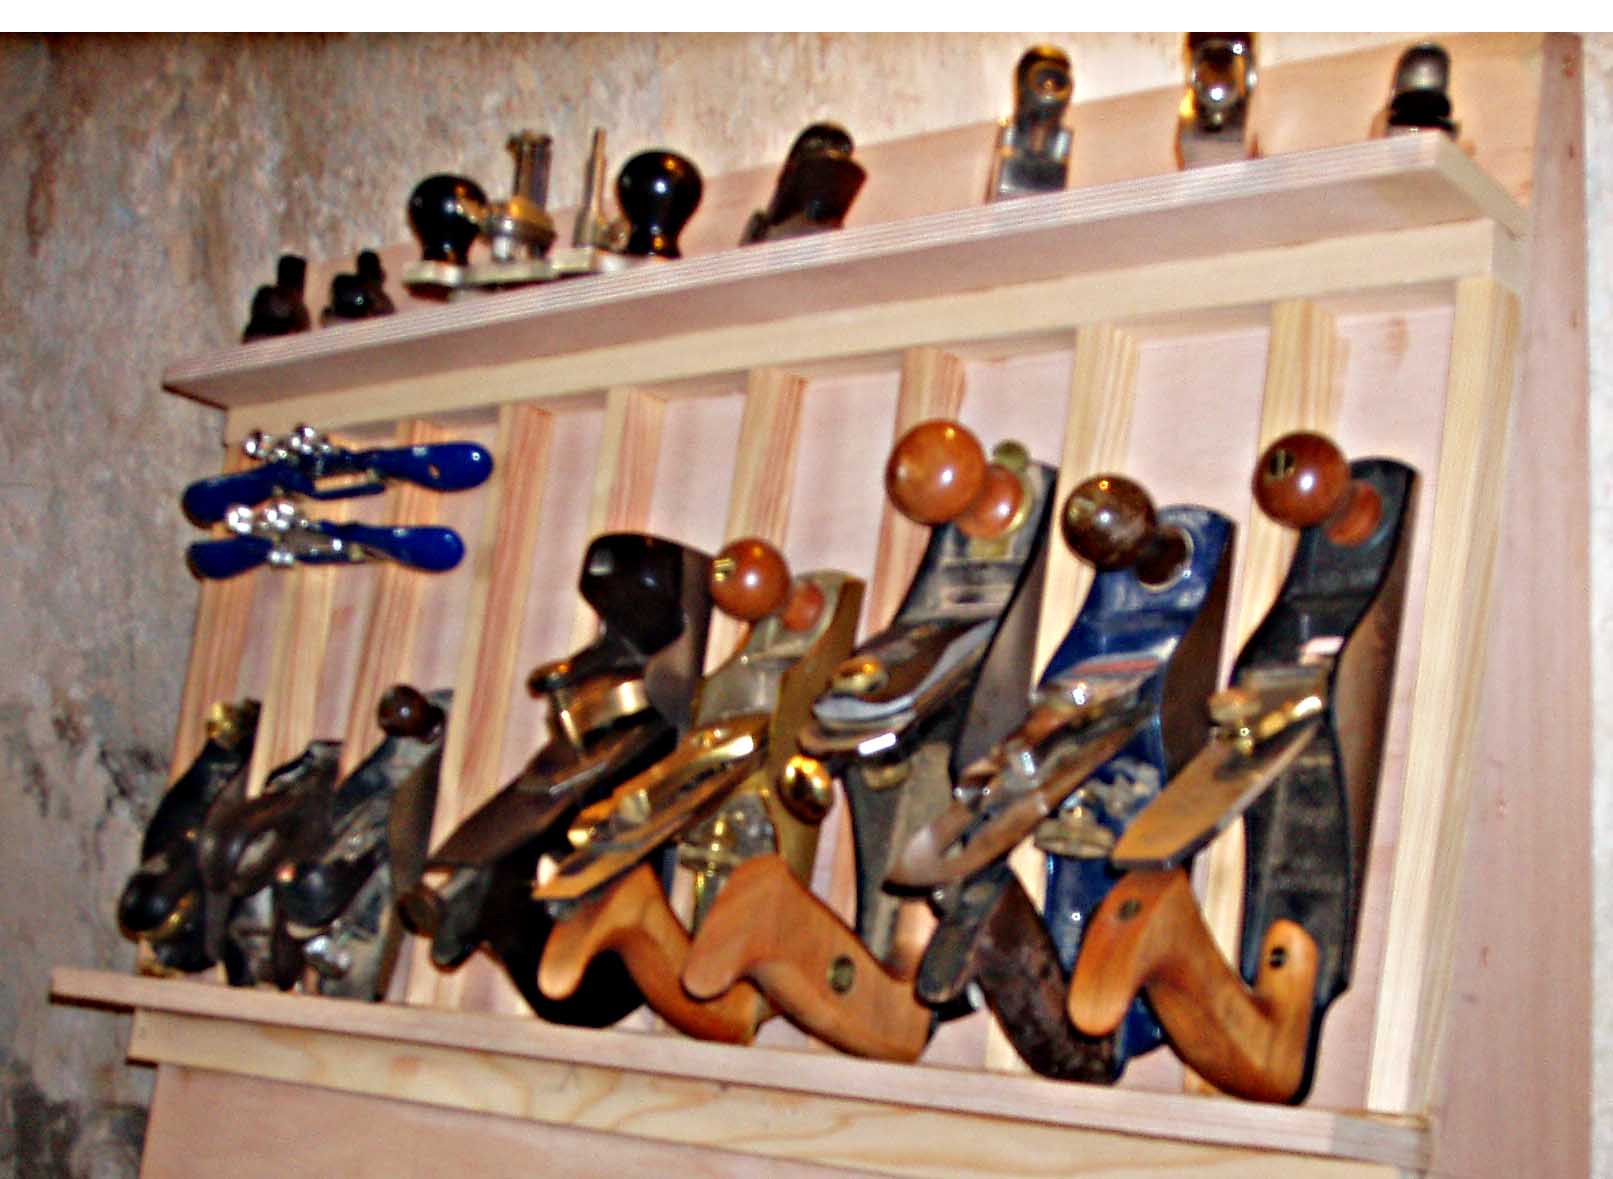 Image of A rack full of smoothing planes